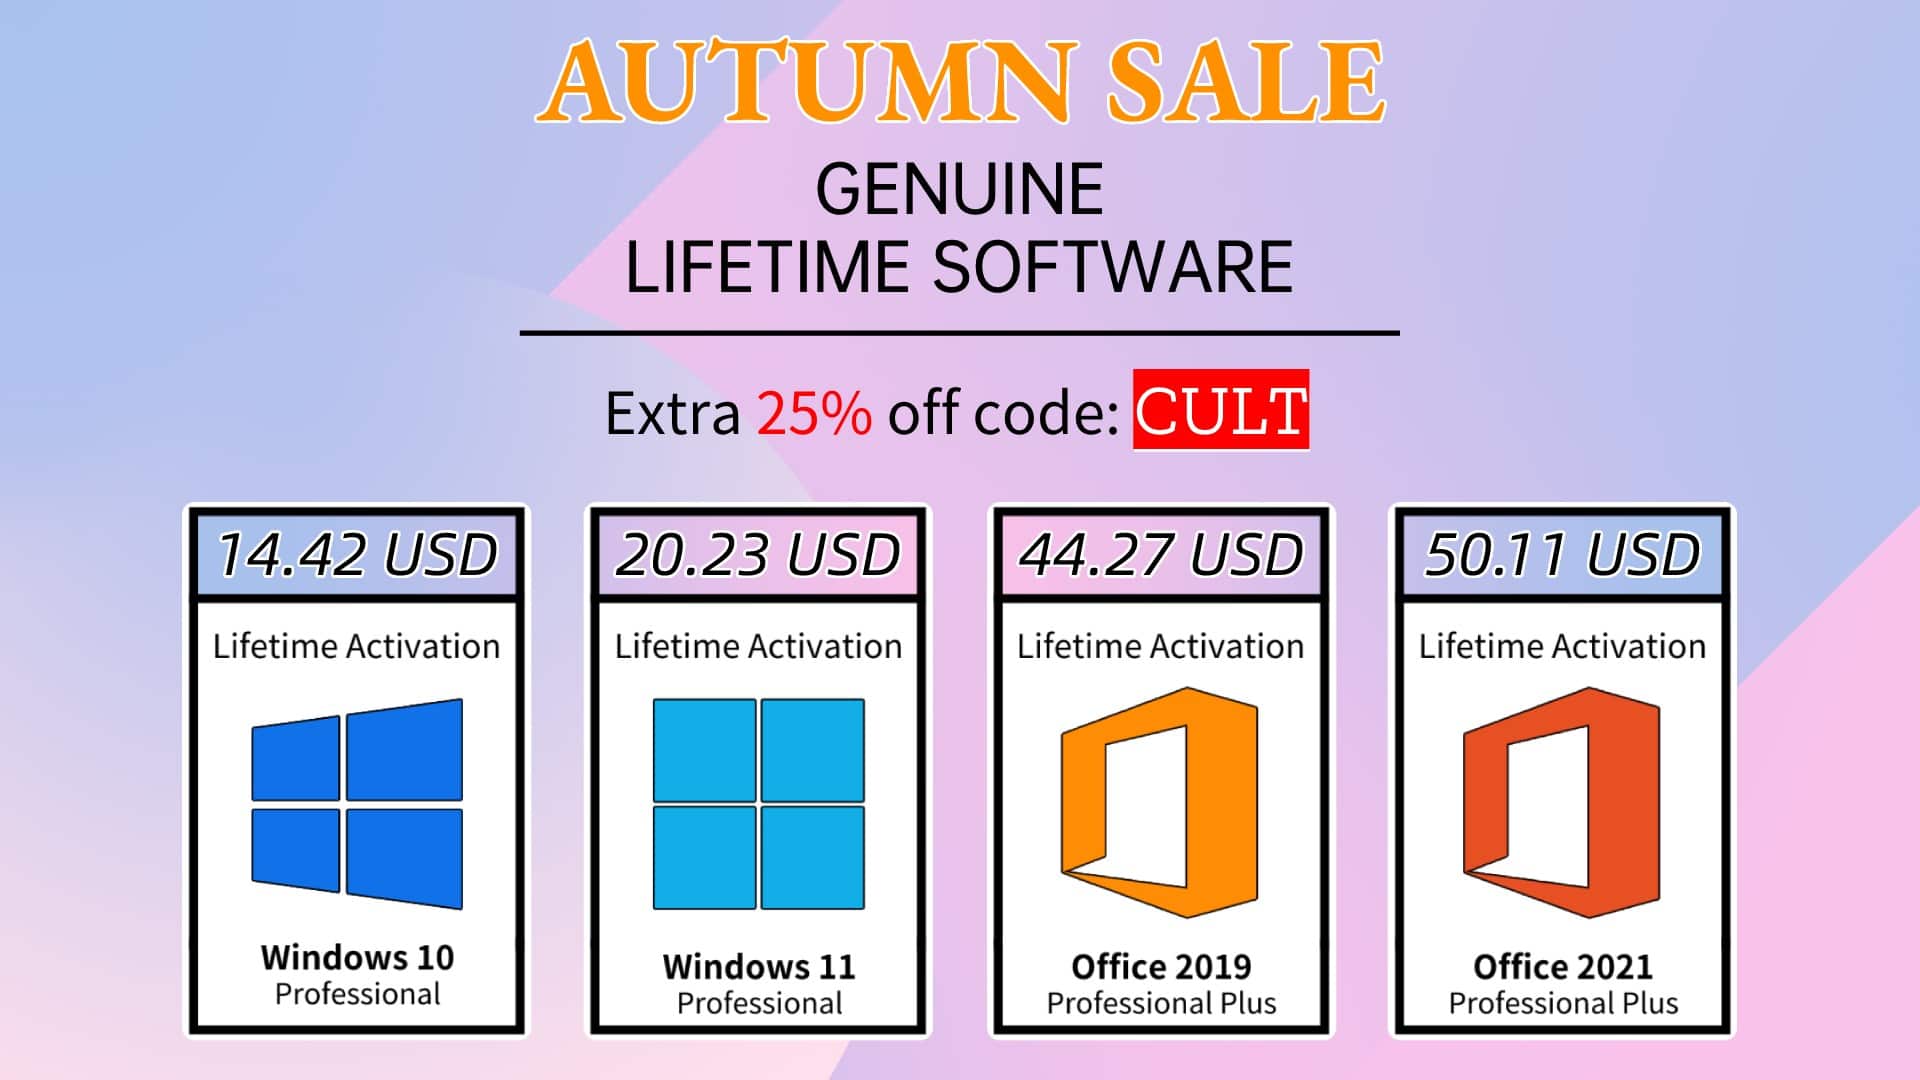 If you'd like to save money on genuine Microsoft software, head to SCDKey.com using the links above. And don't forget to enter promo code CULT to get extra savings.